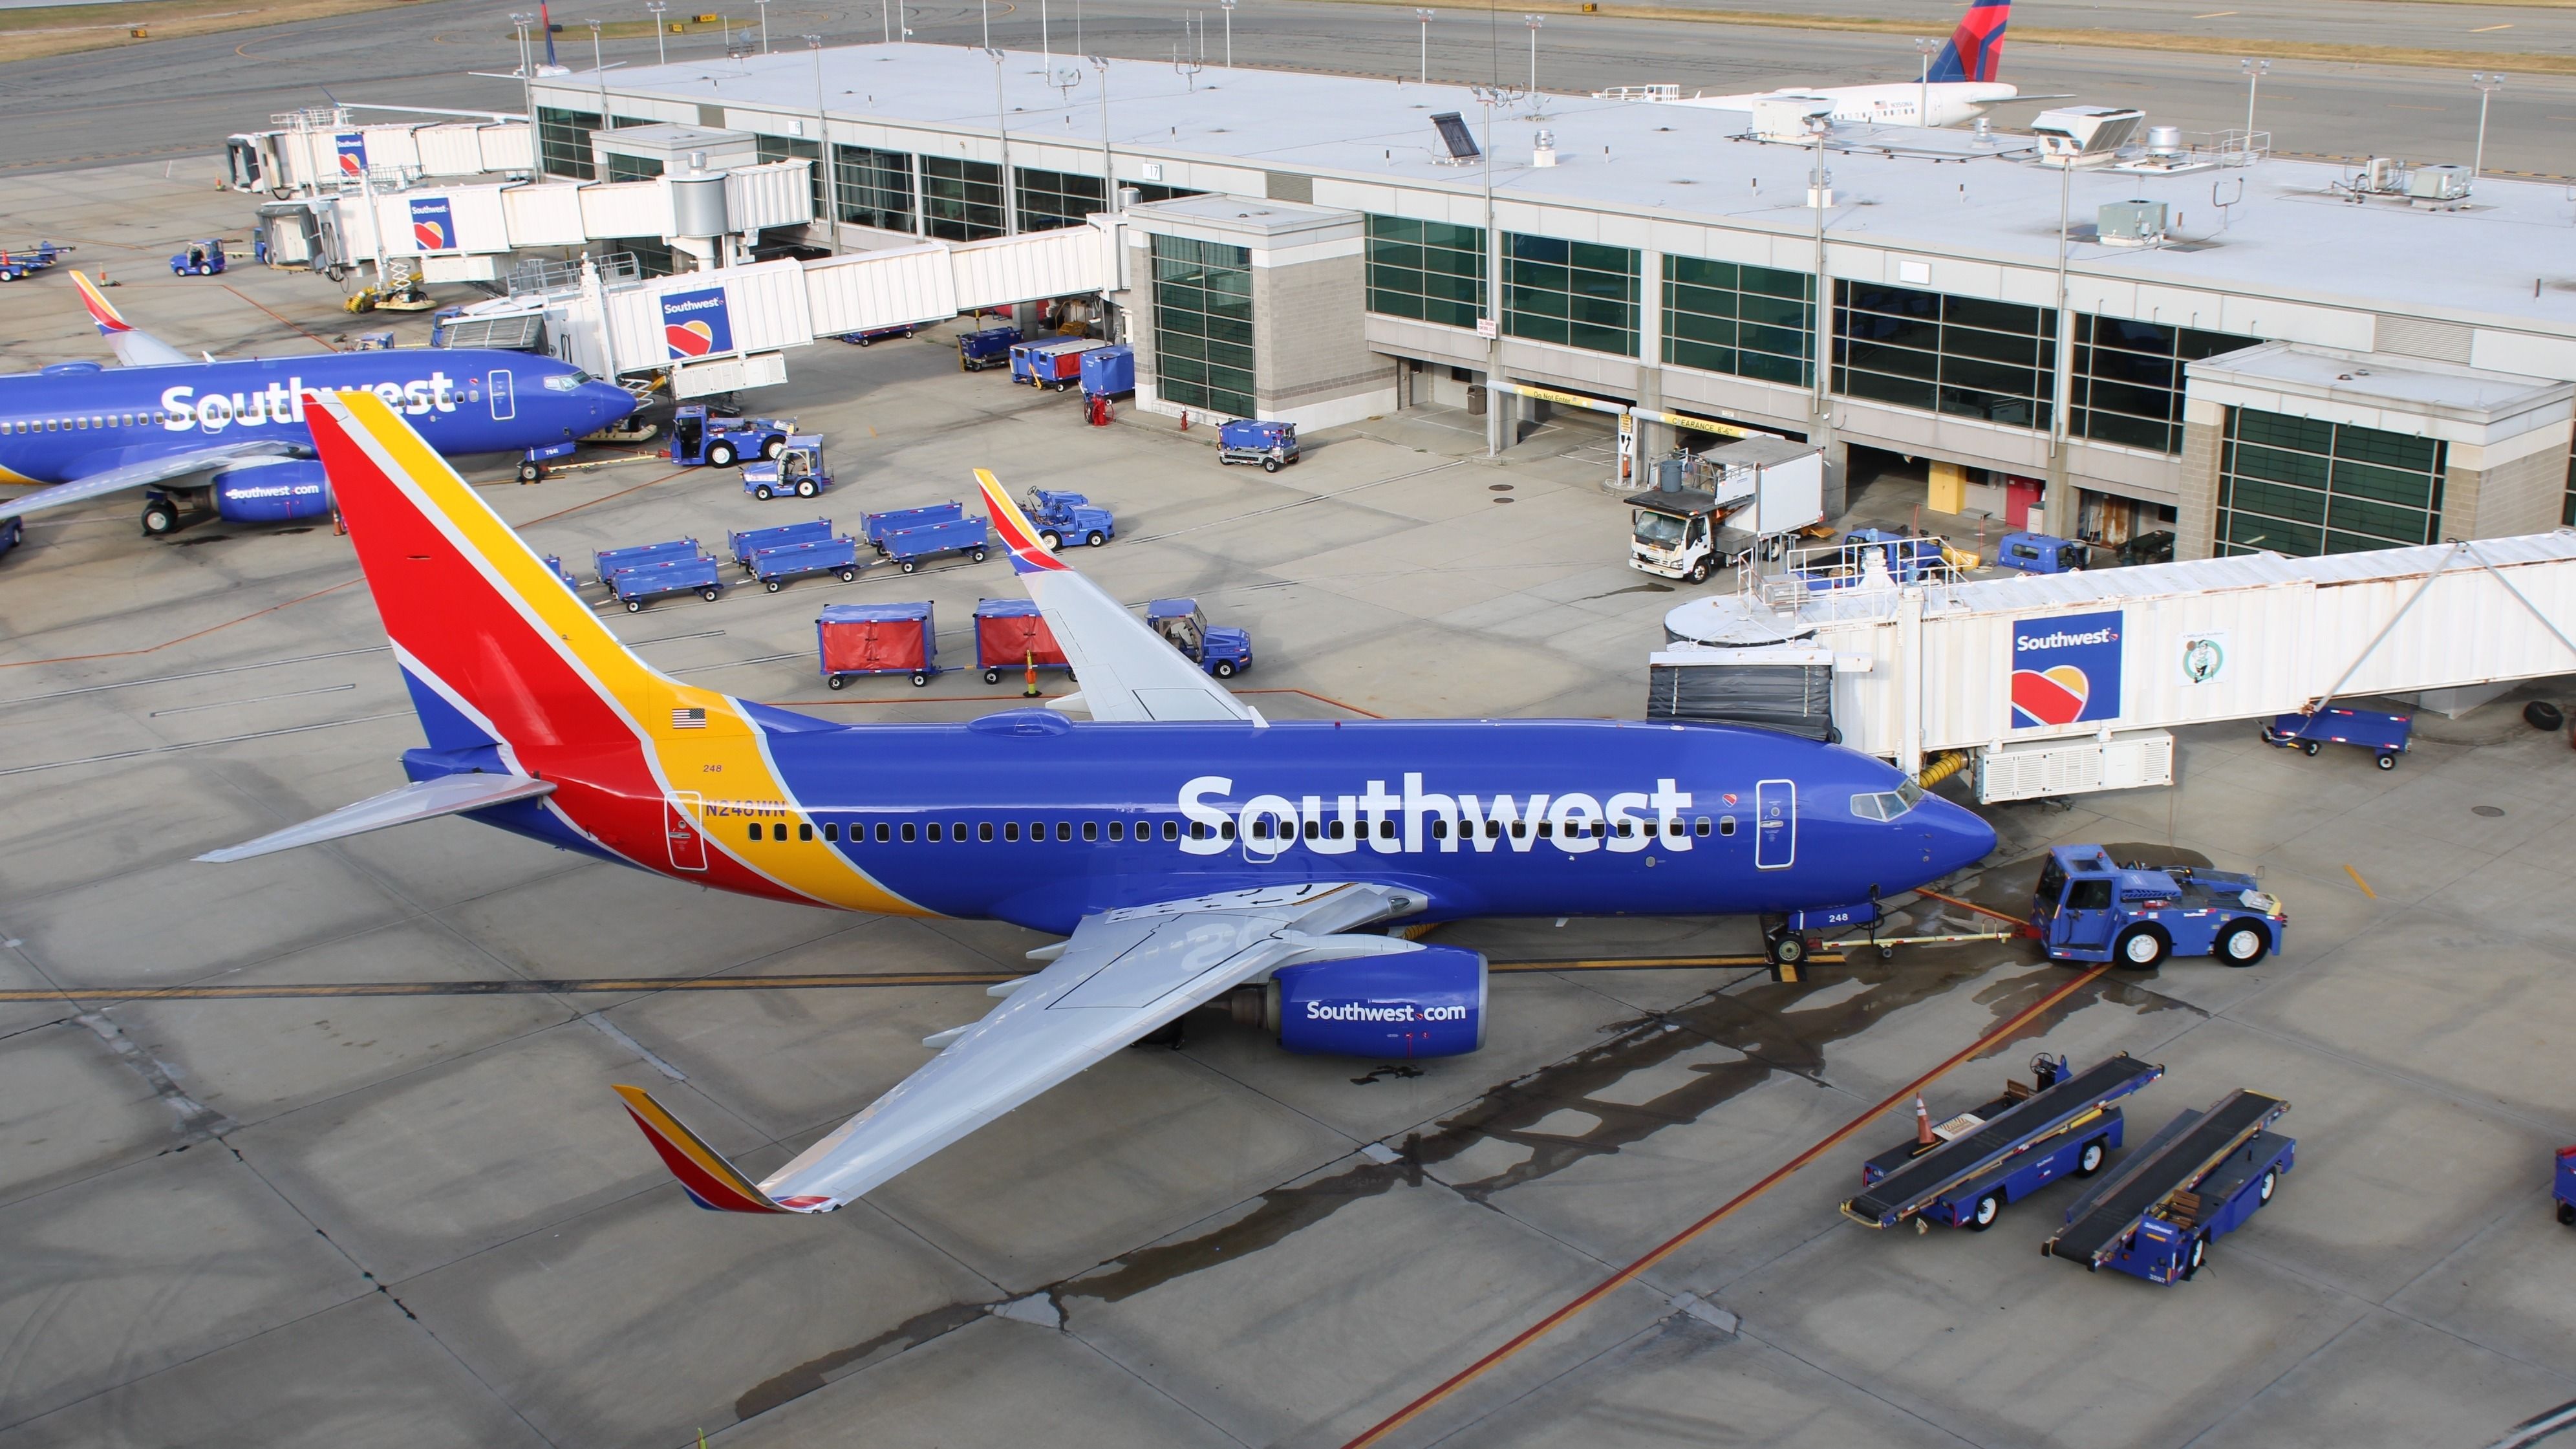 A Southwest Boeing 737 parked at the airport